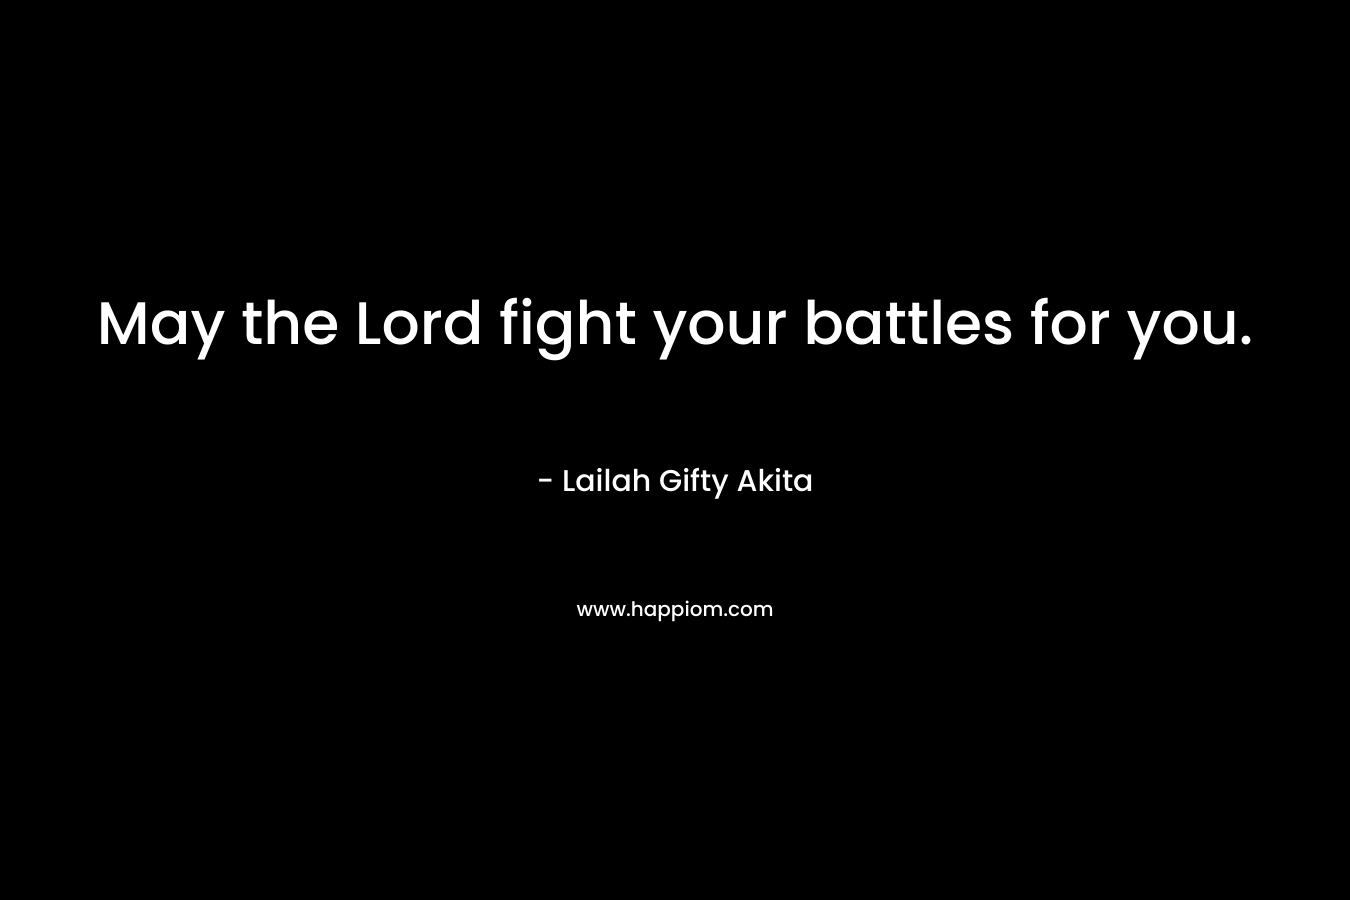 May the Lord fight your battles for you.